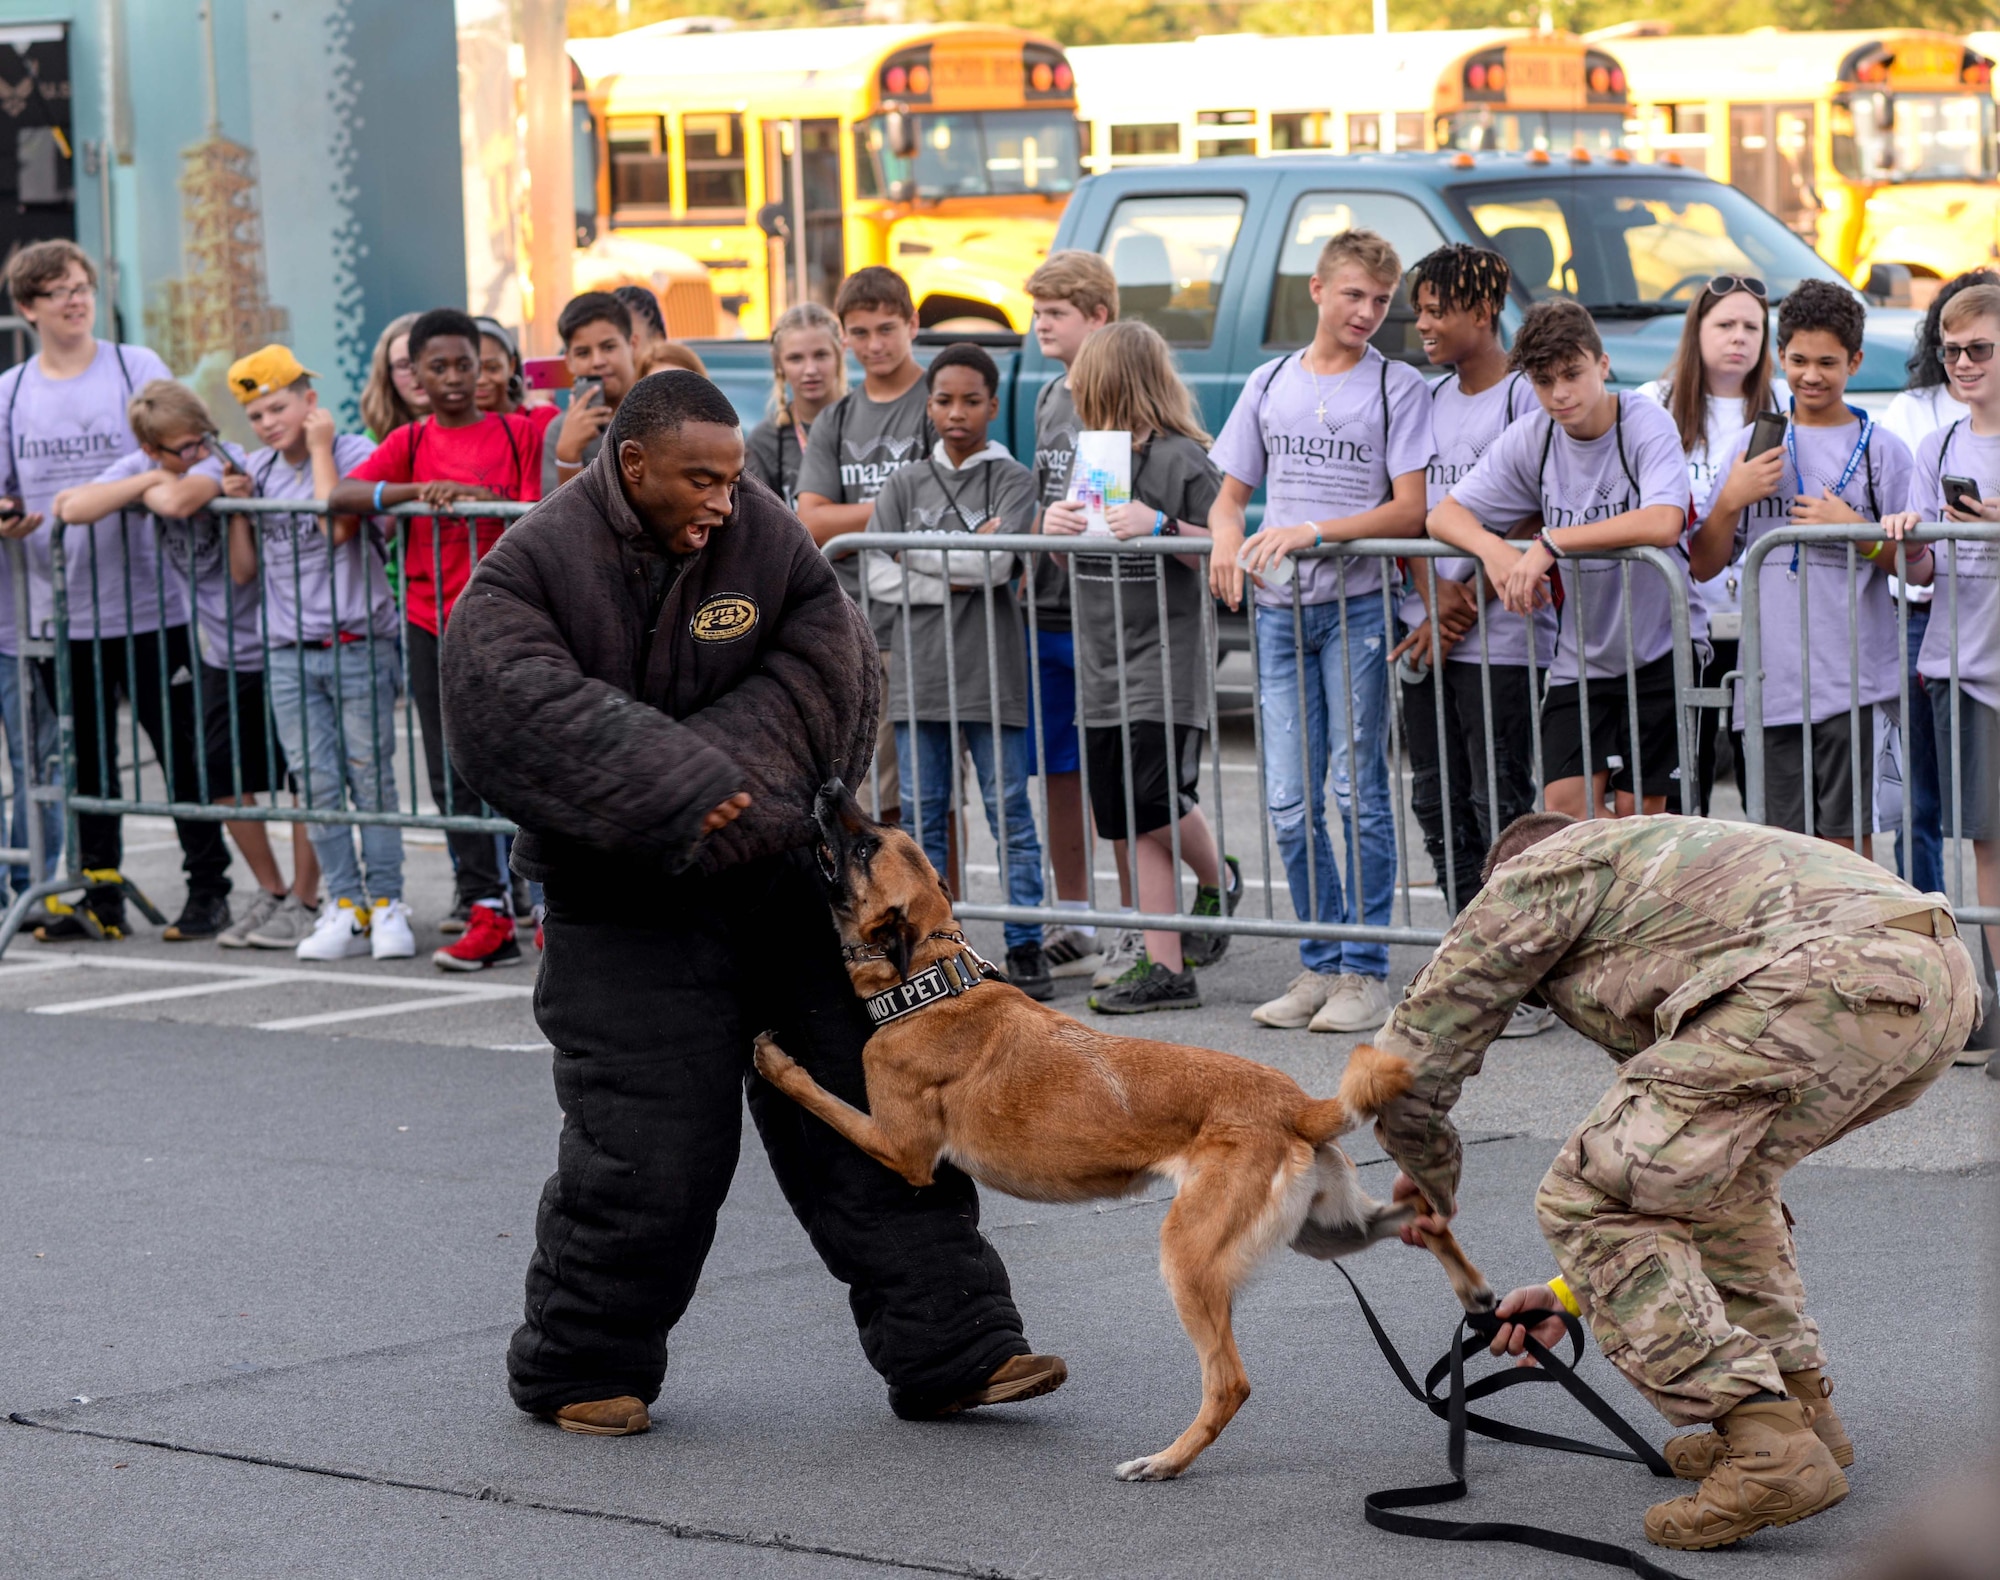 Two Airmen from the 14th Security Forces Squadron at Columbus Air Force Base, Miss., demonstrate the ability of a military working dog at the Imagine the Possibilities Career Expo Oct. 1, 2019, at the BancorpSouth Arena in Tupelo. A SFS member must complete 18 months of service before they can train to become a MWD handler. (U.S. Air Force photo by Airman Davis Donaldson)